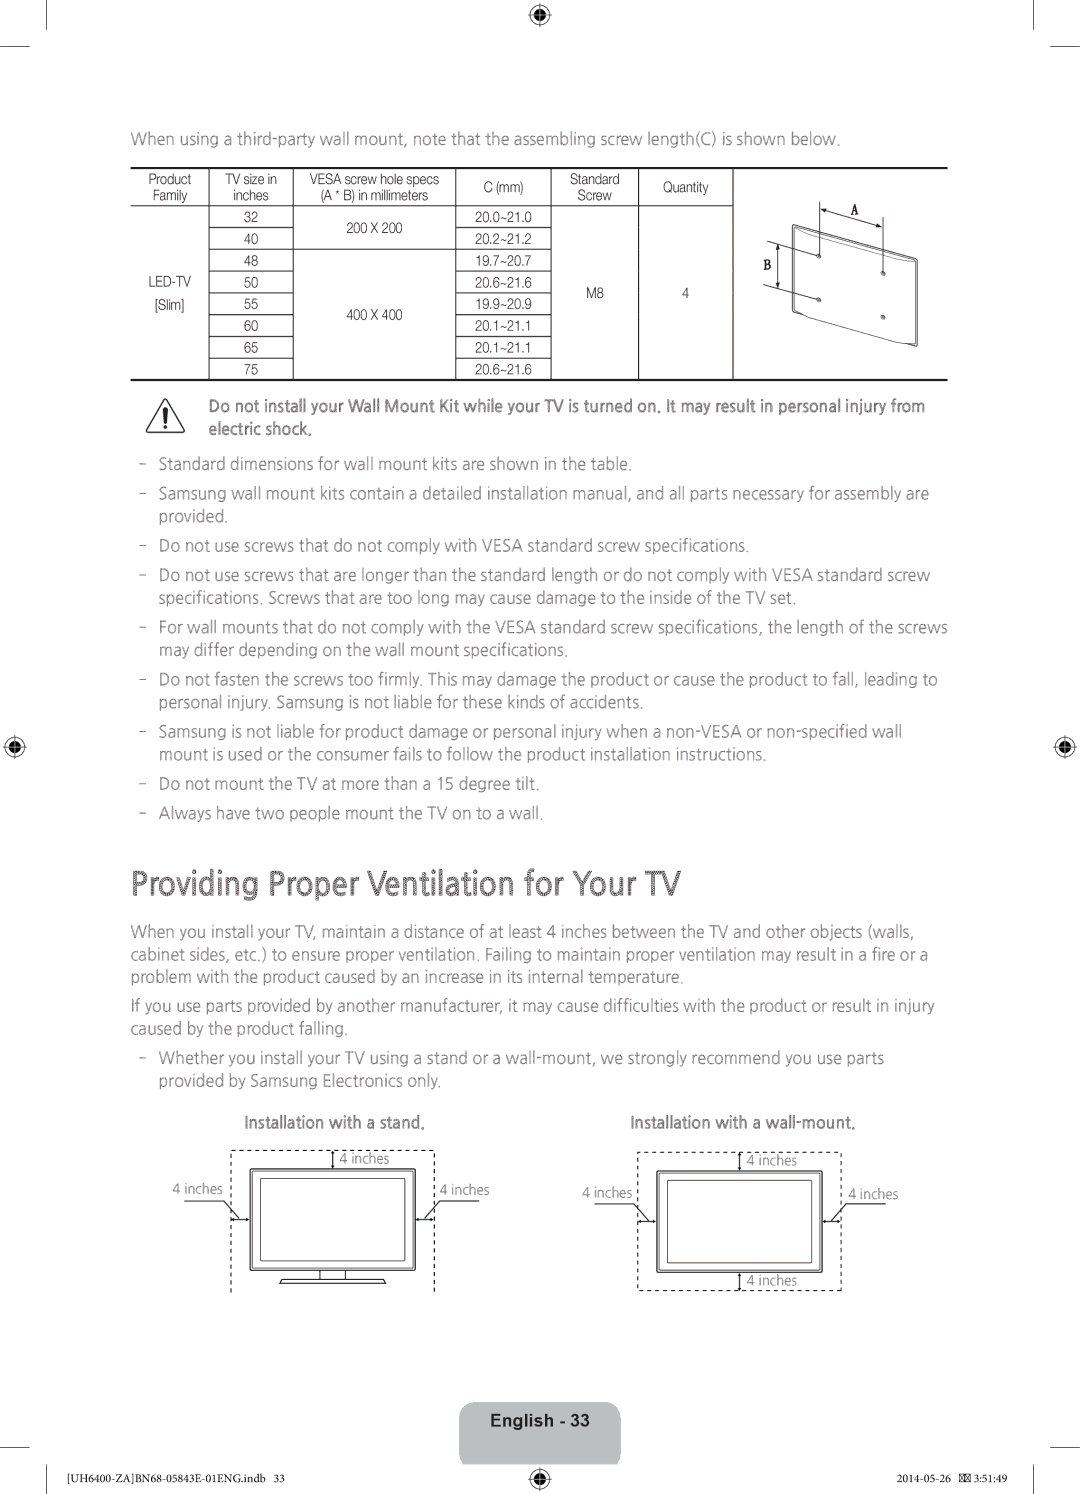 Samsung UN60H6400, UN65H6400 user manual Providing Proper Ventilation for Your TV, Installation with a stand 